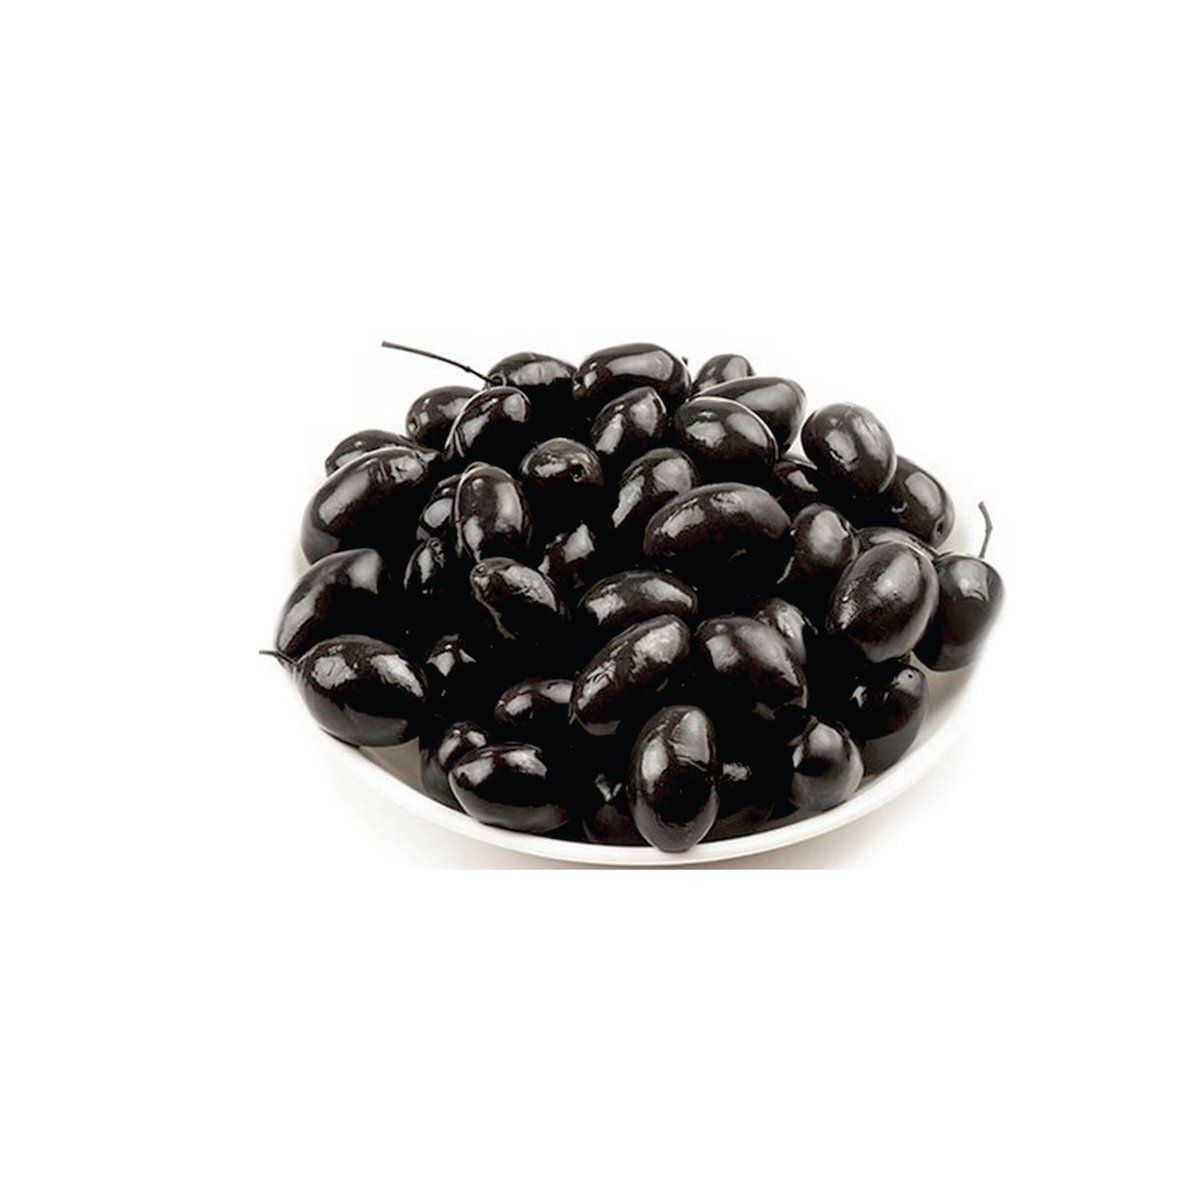 Hutesa Spanish Black Olives Whole 250g Approx Weight